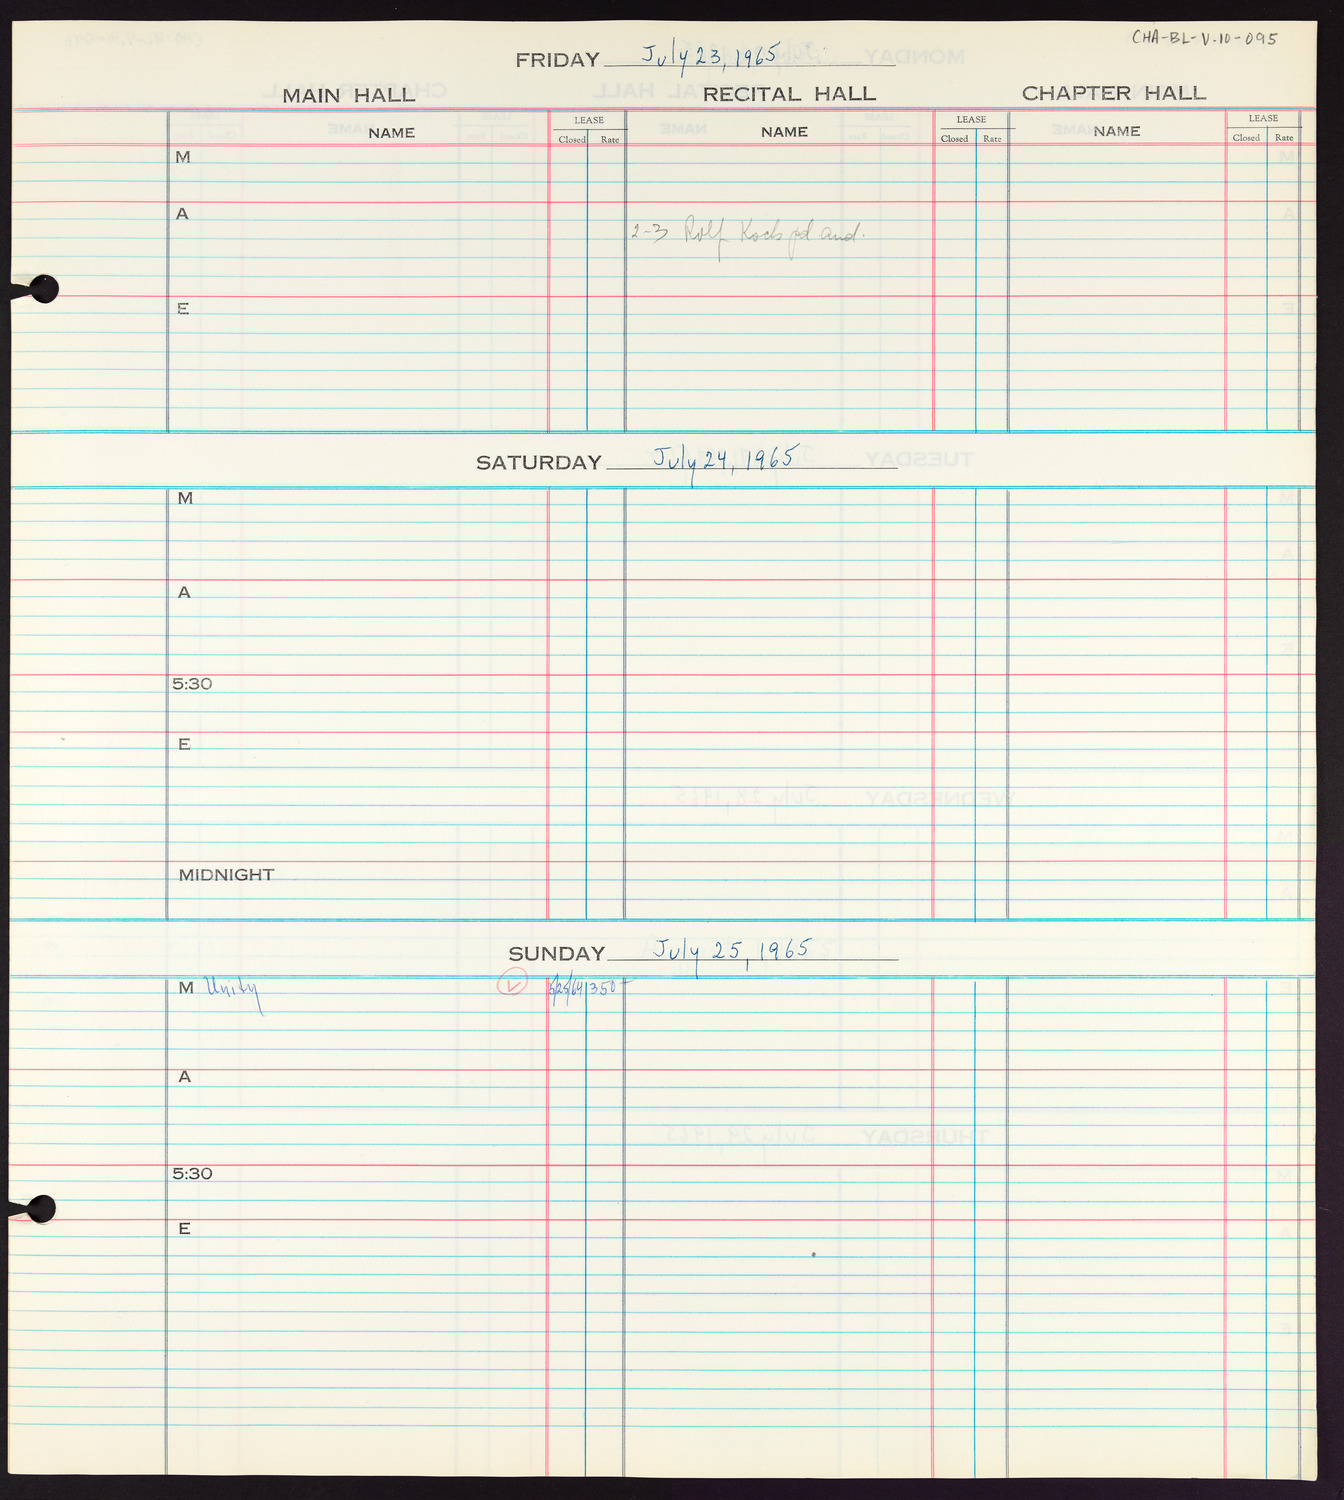 Carnegie Hall Booking Ledger, volume 10, page 95